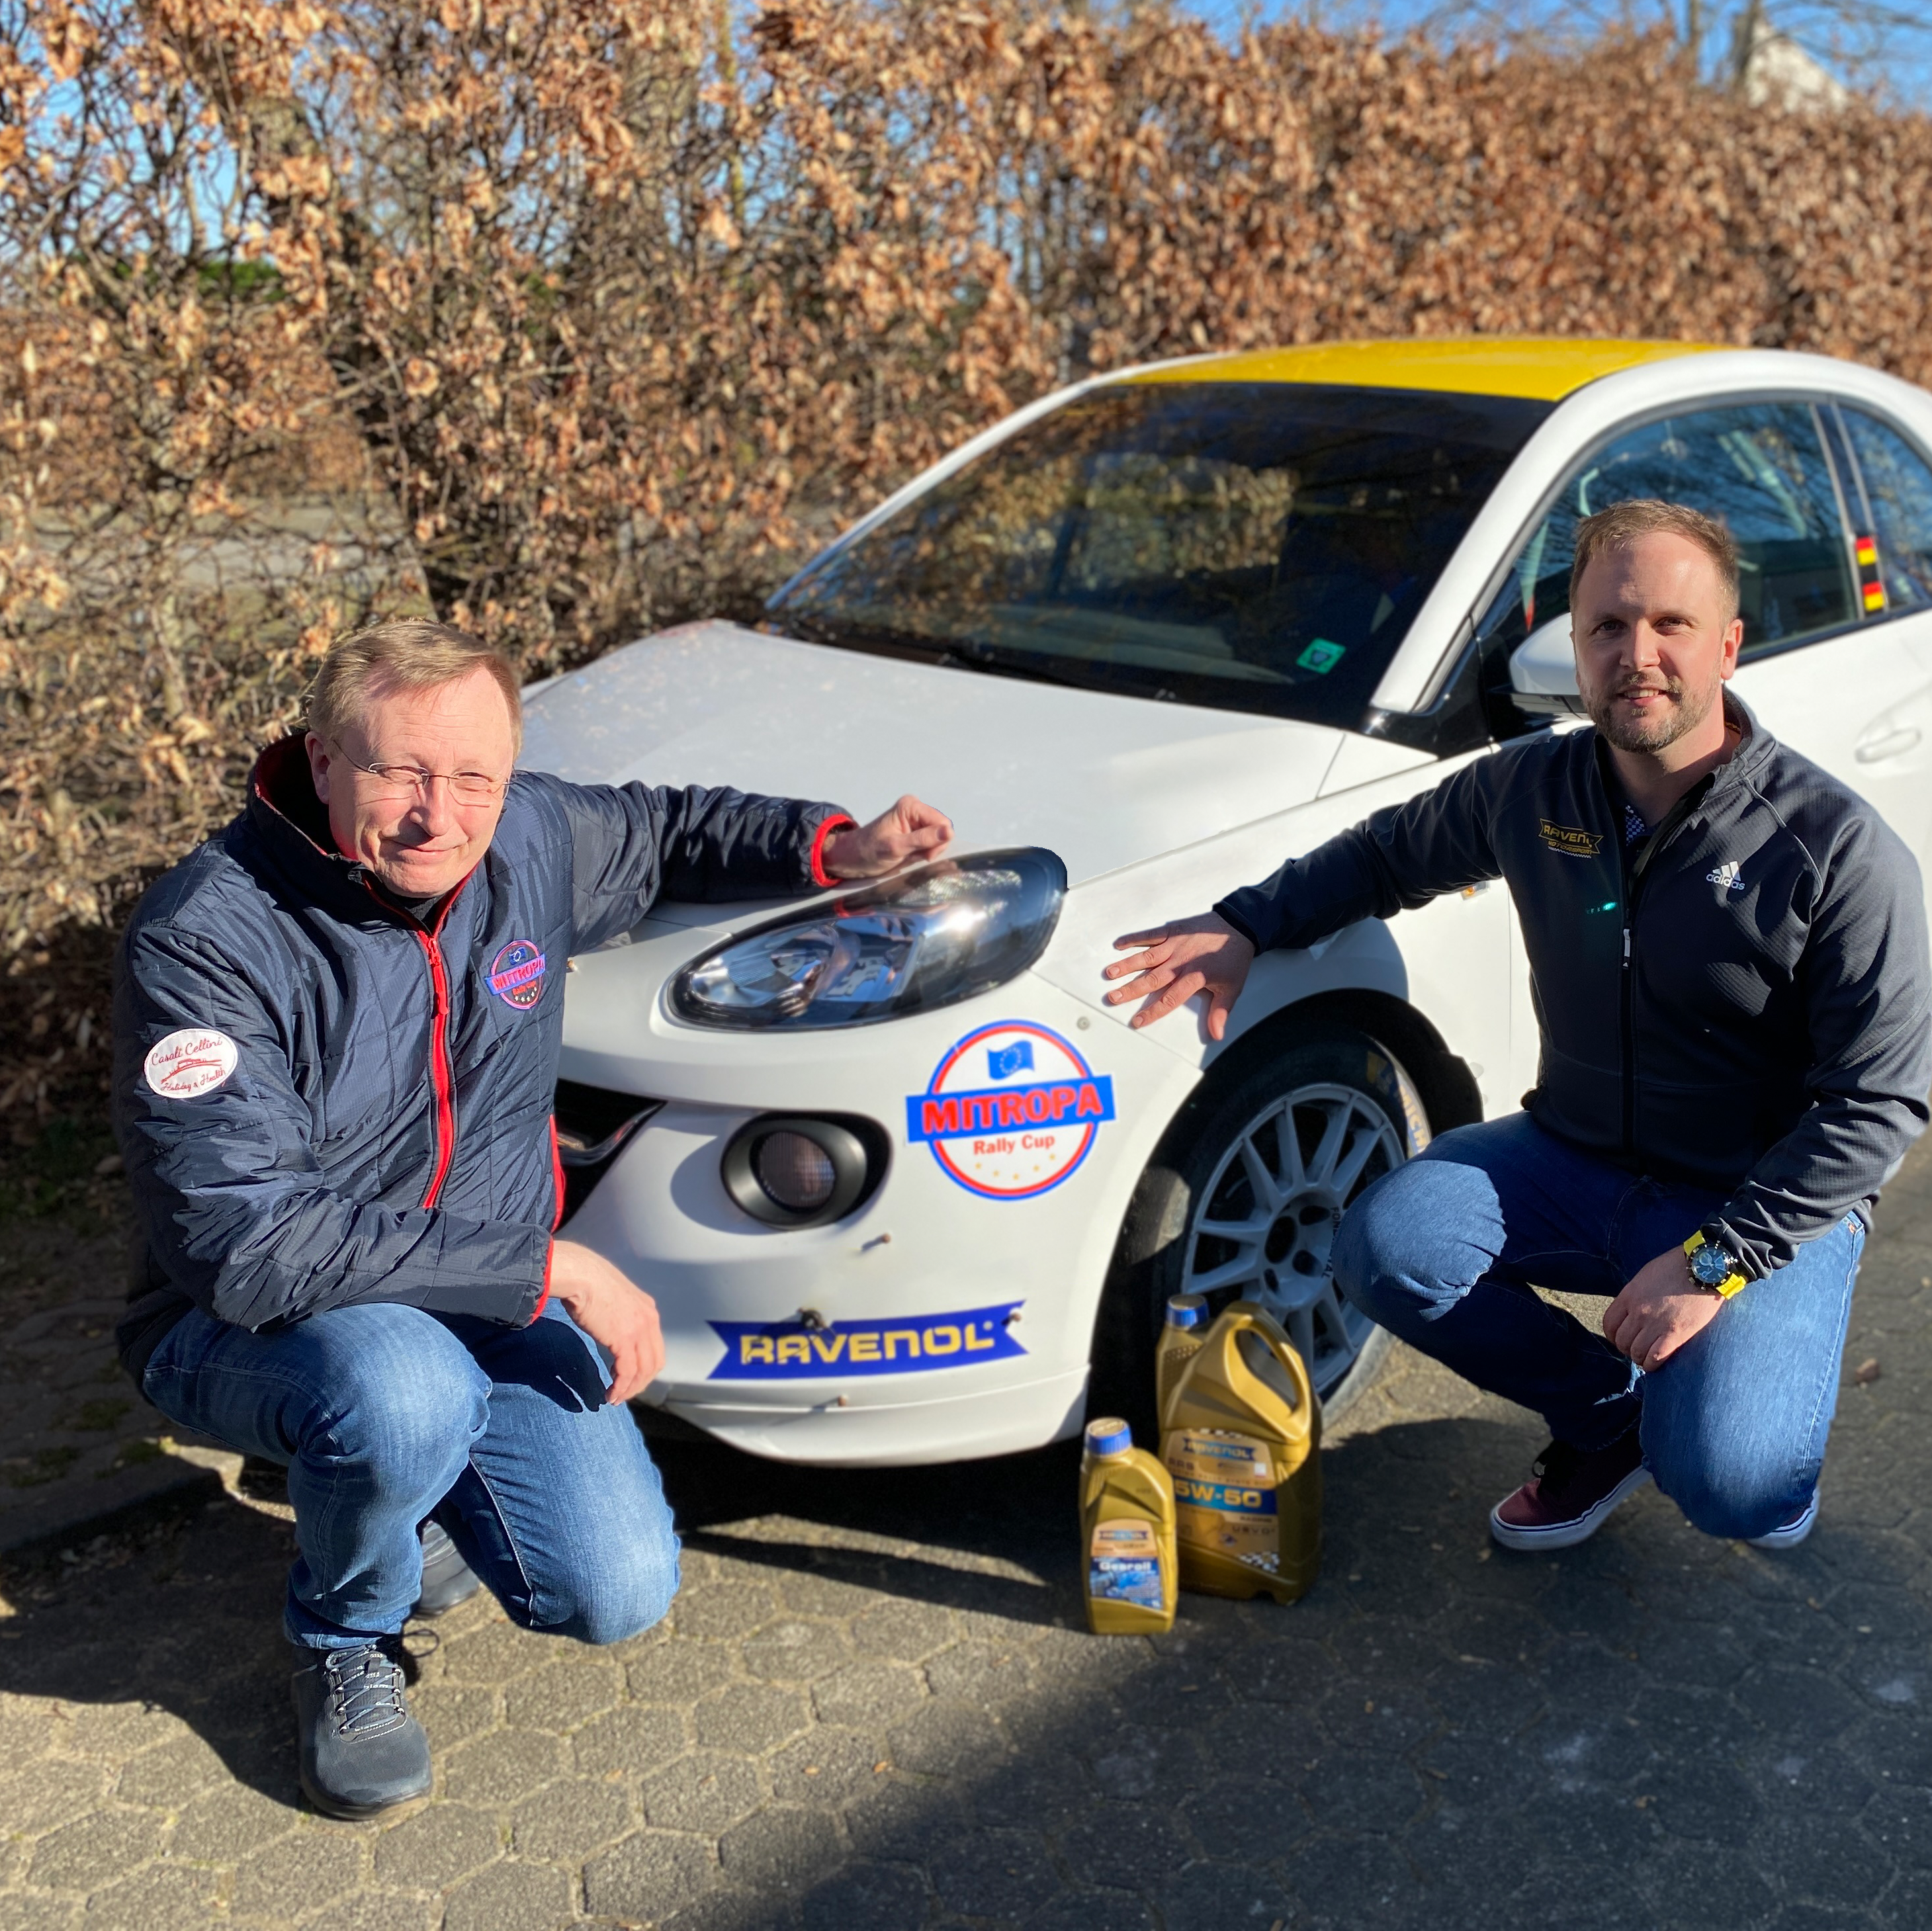 RAVENOL is the new Partner of The Mitropa Rally Cup